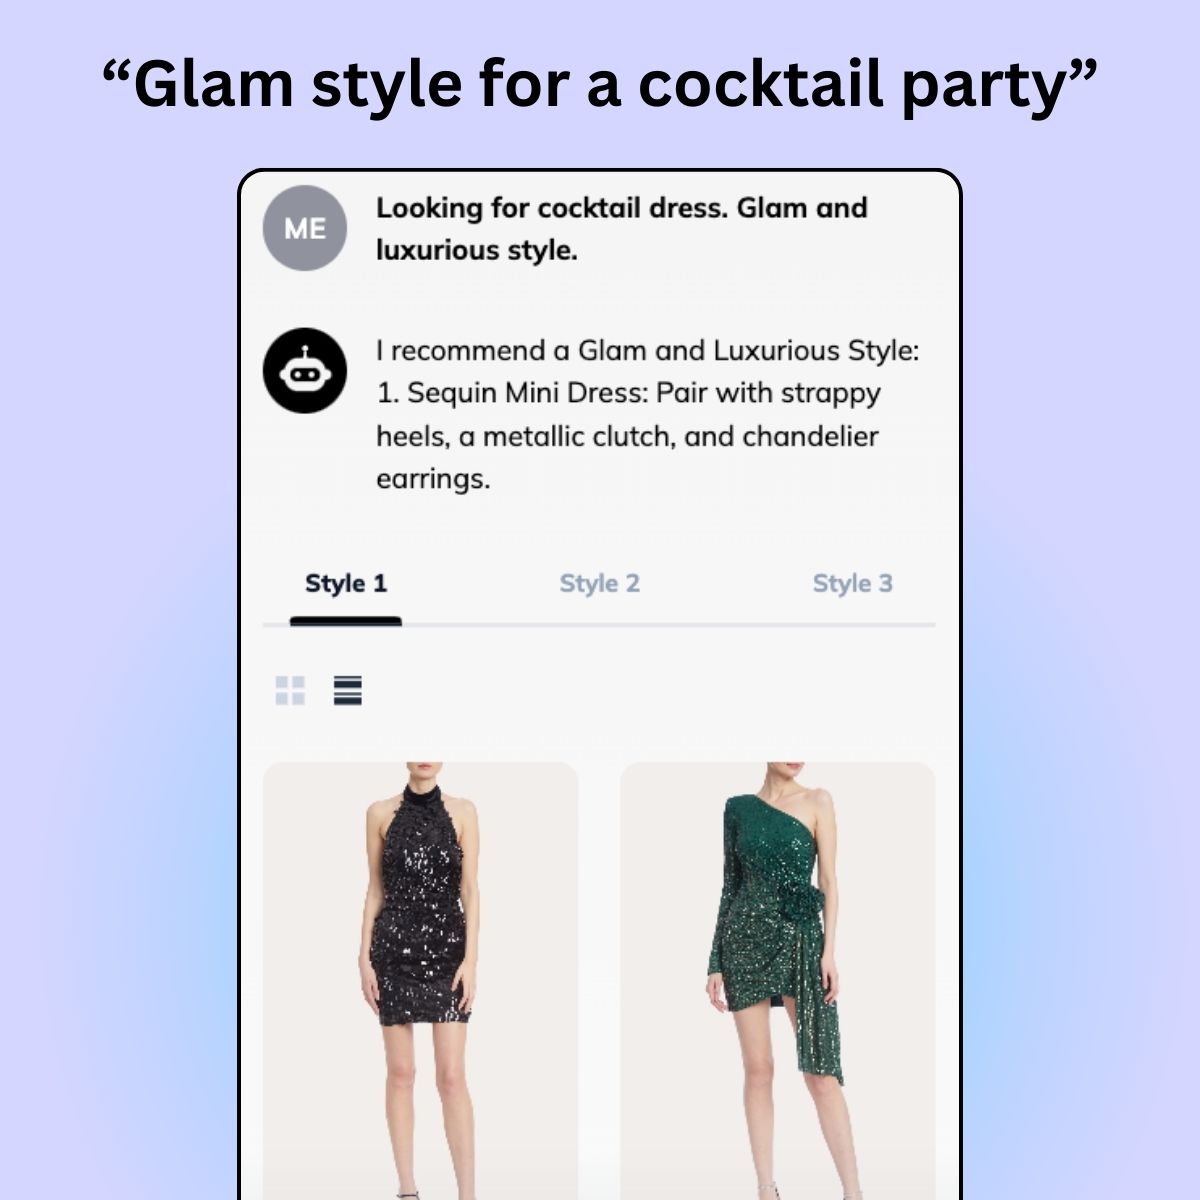 AI Stylist recommending a glam cocktail party